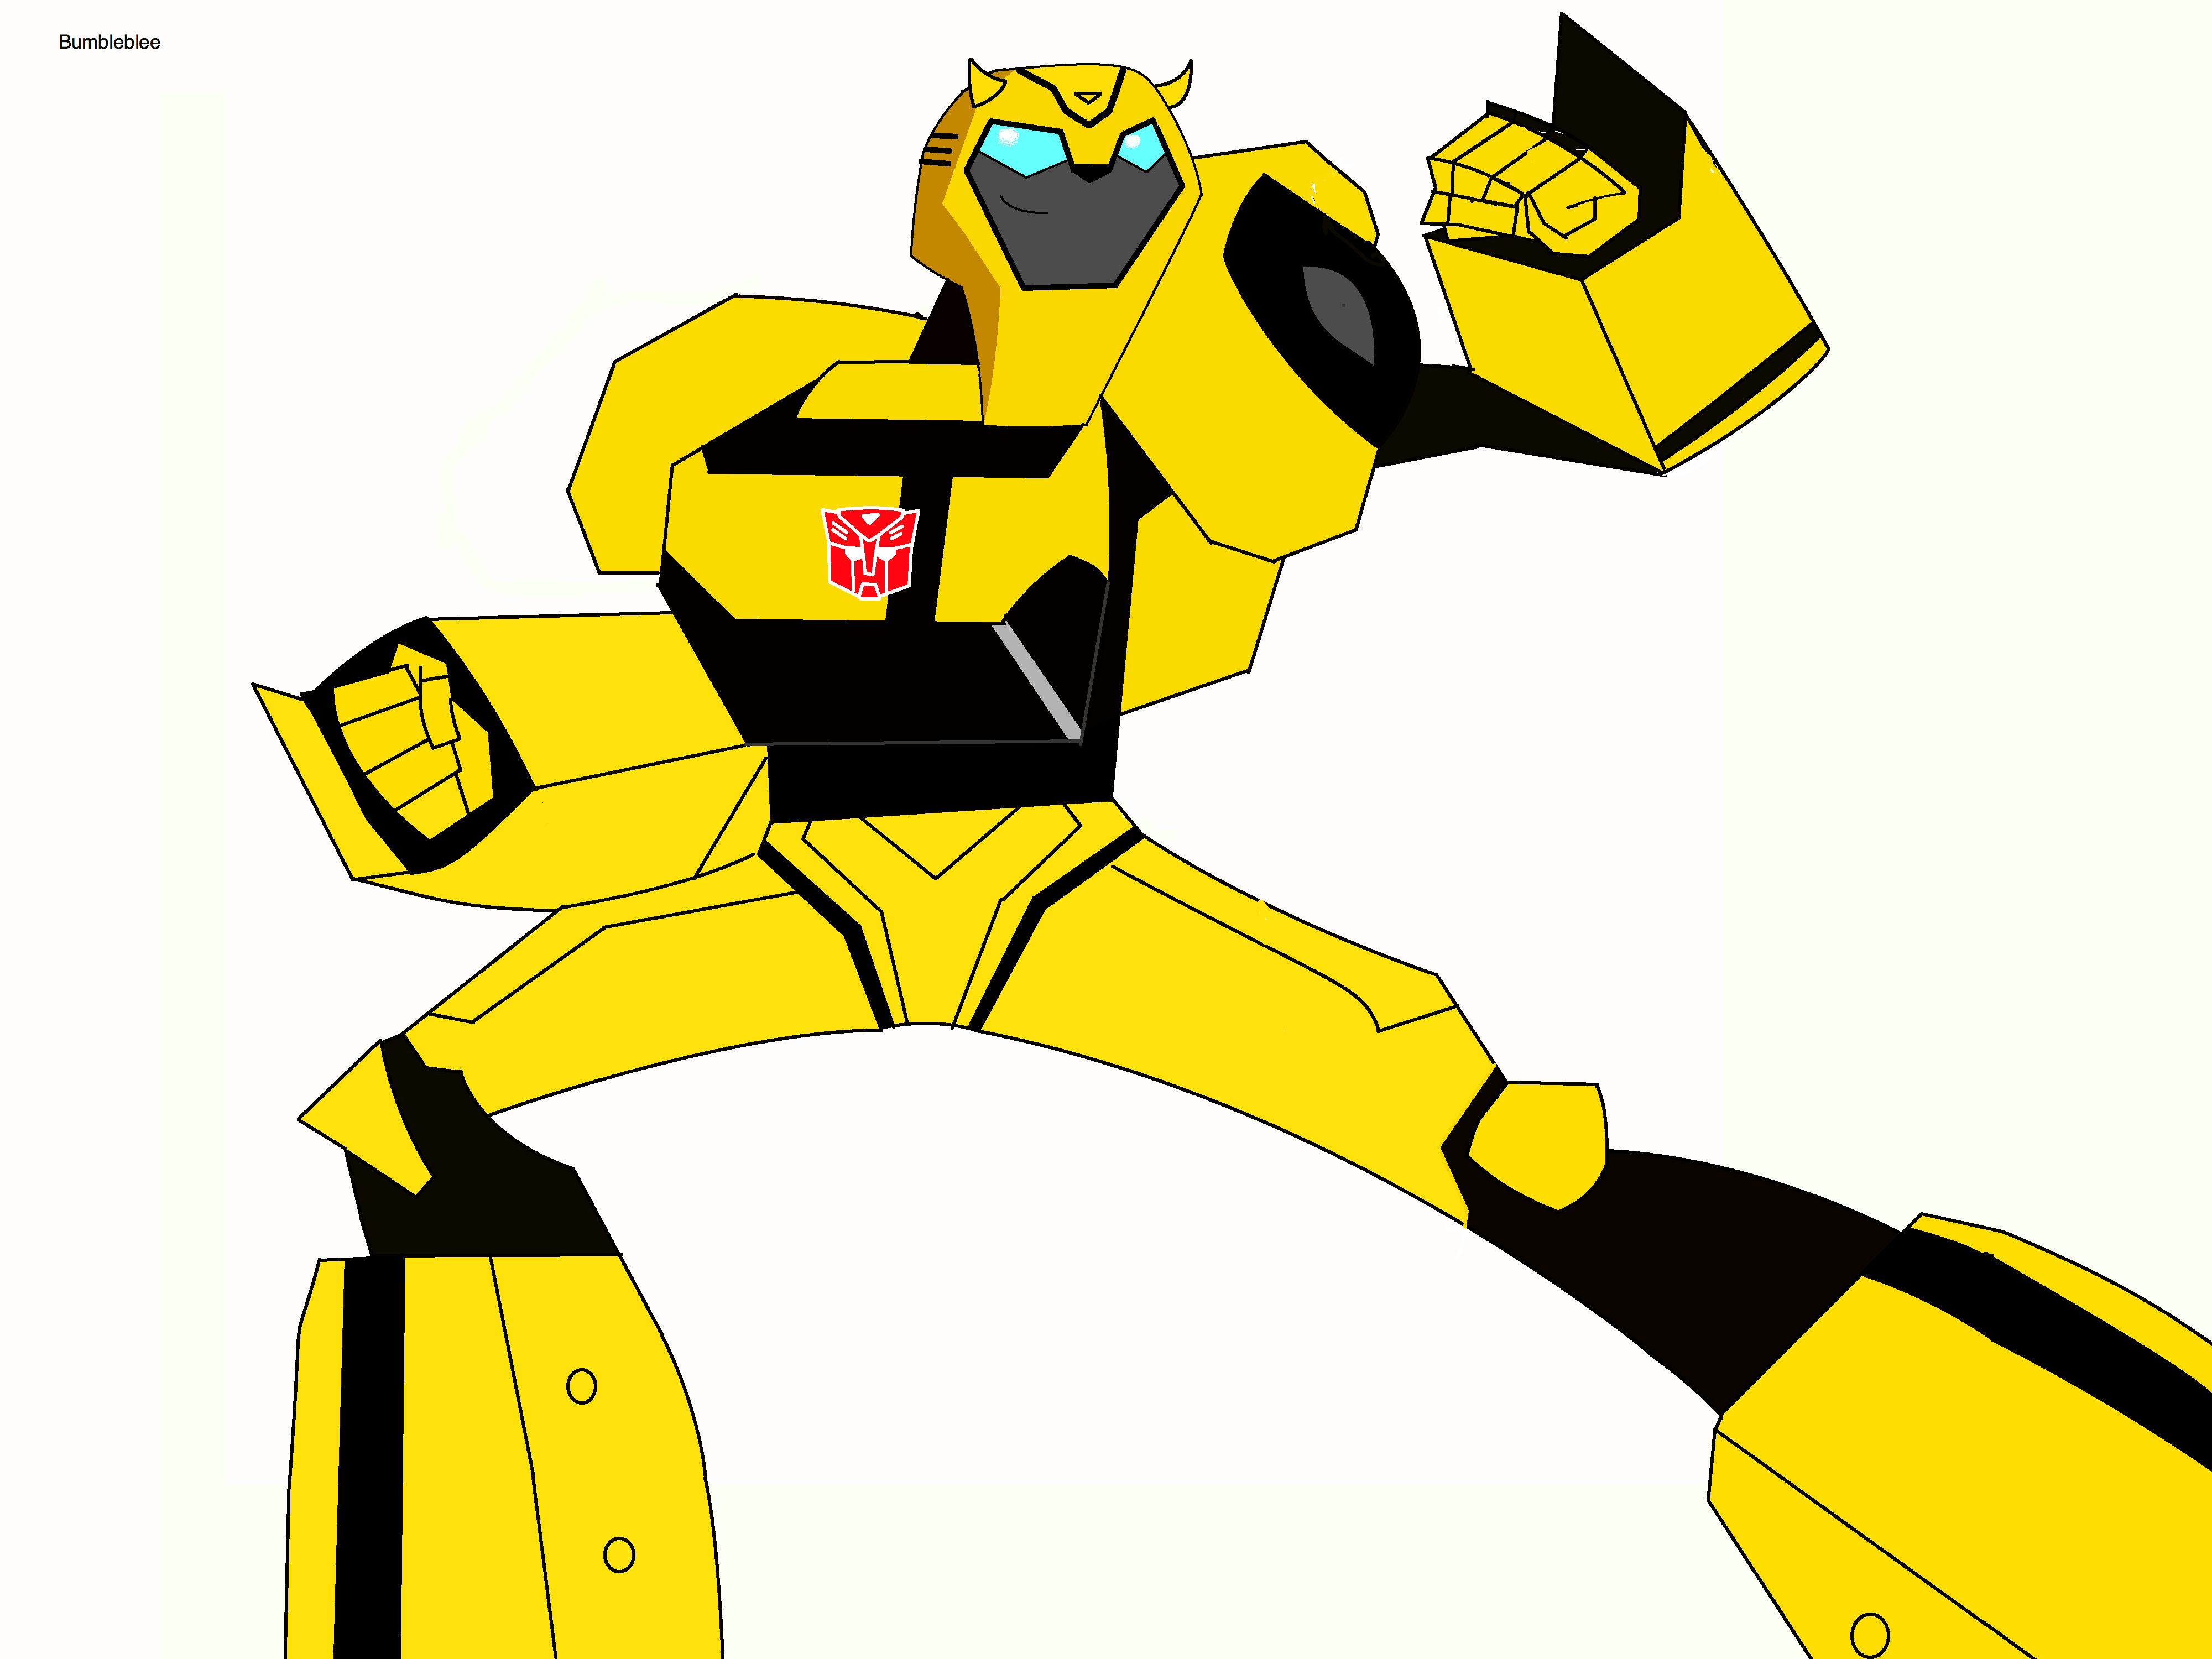 2D Artwork: Bumblebee Transformers Animated - TFW2005 - The 2005 